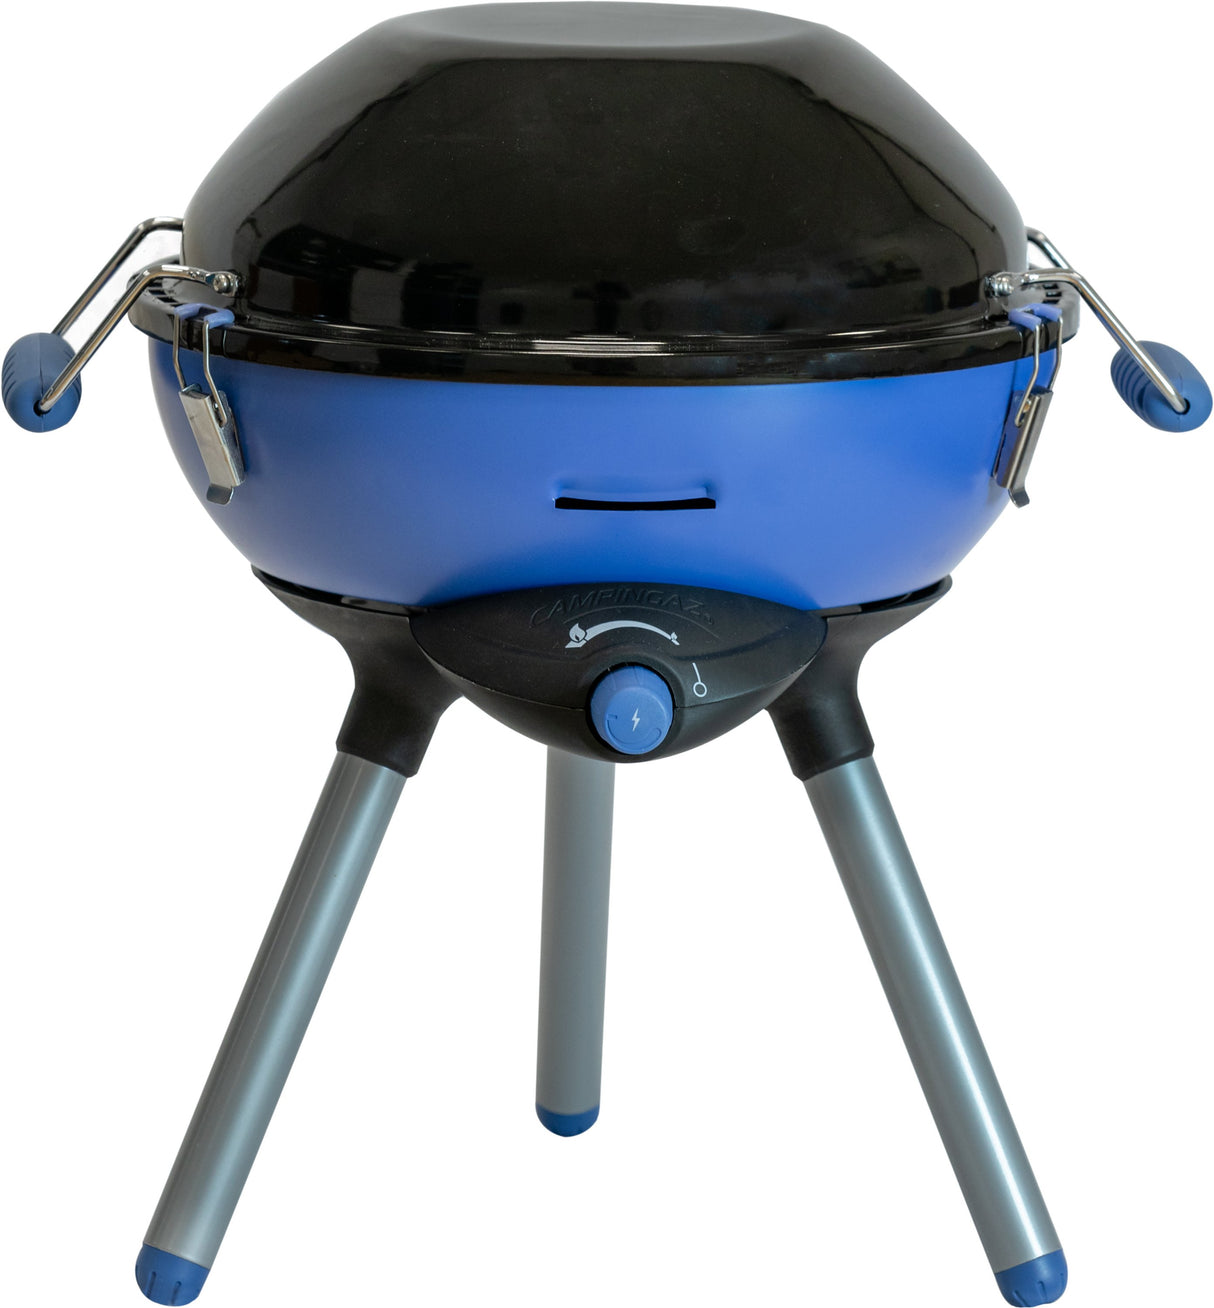 Stove Party Grill 400 Int C